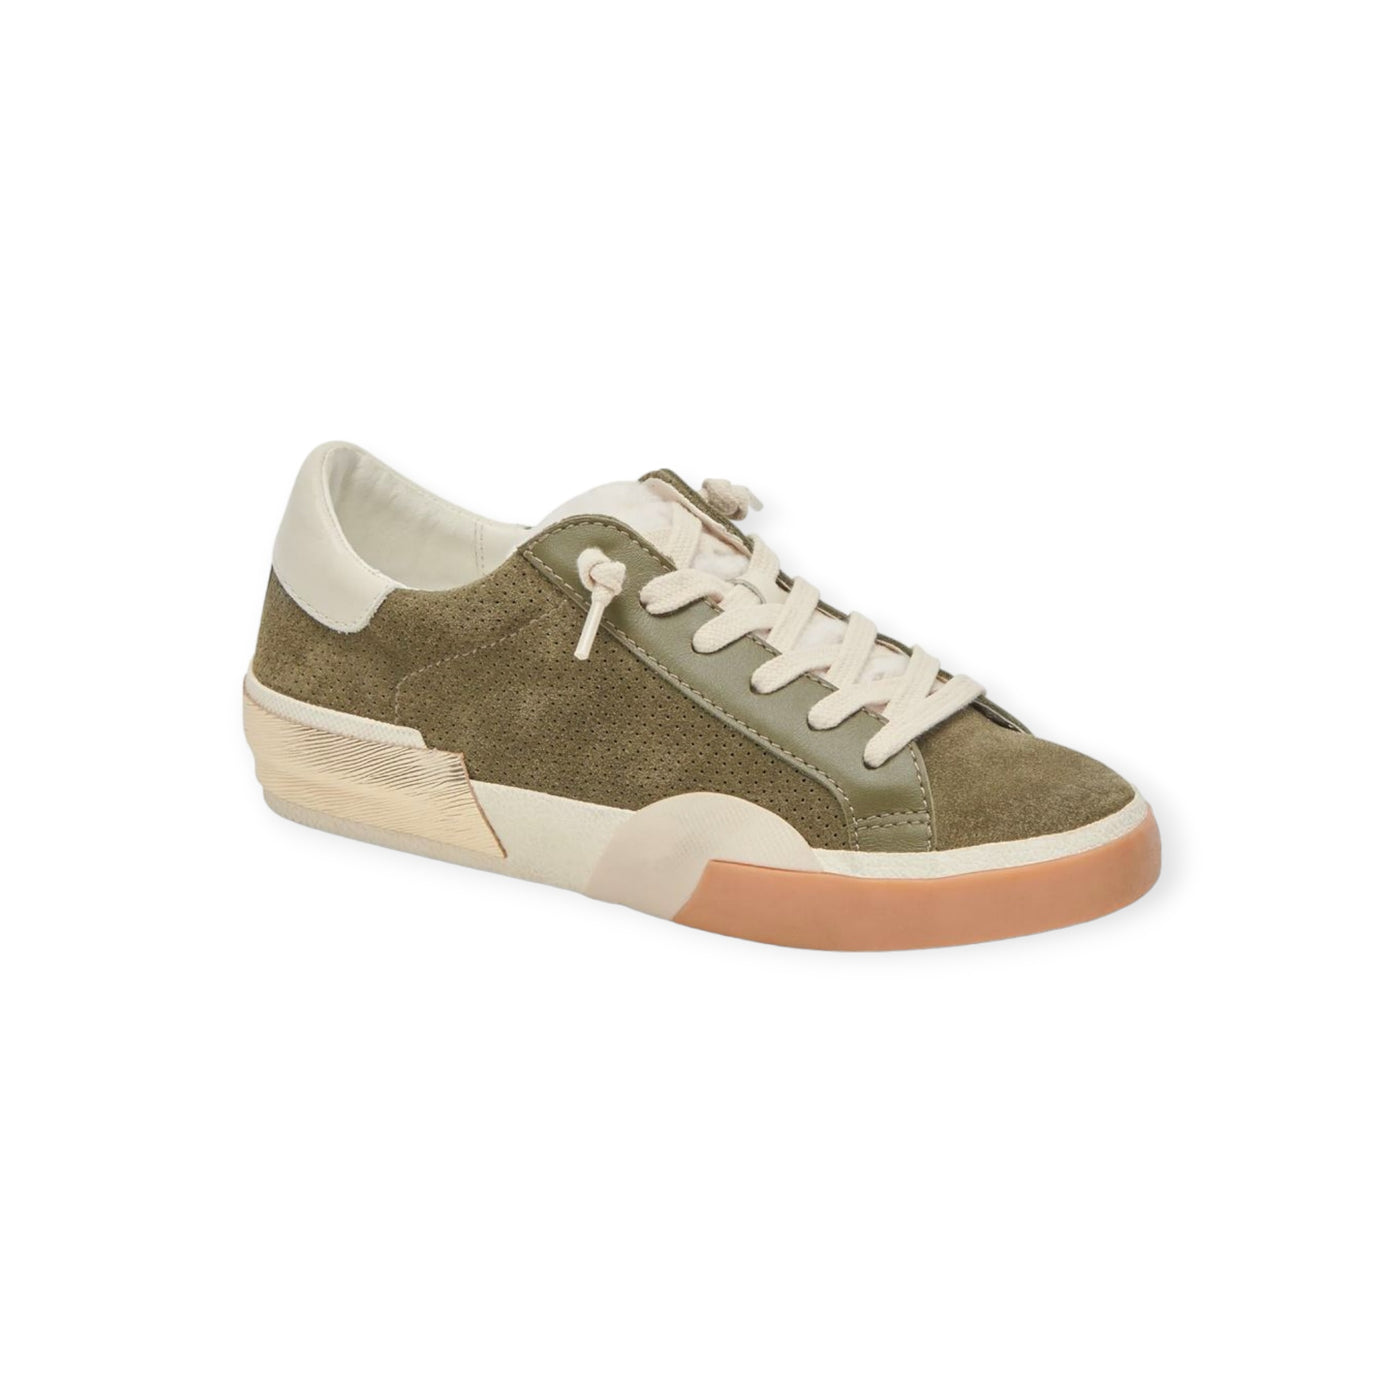 Zina Plush Sneakers in Moss Perforated Suede No